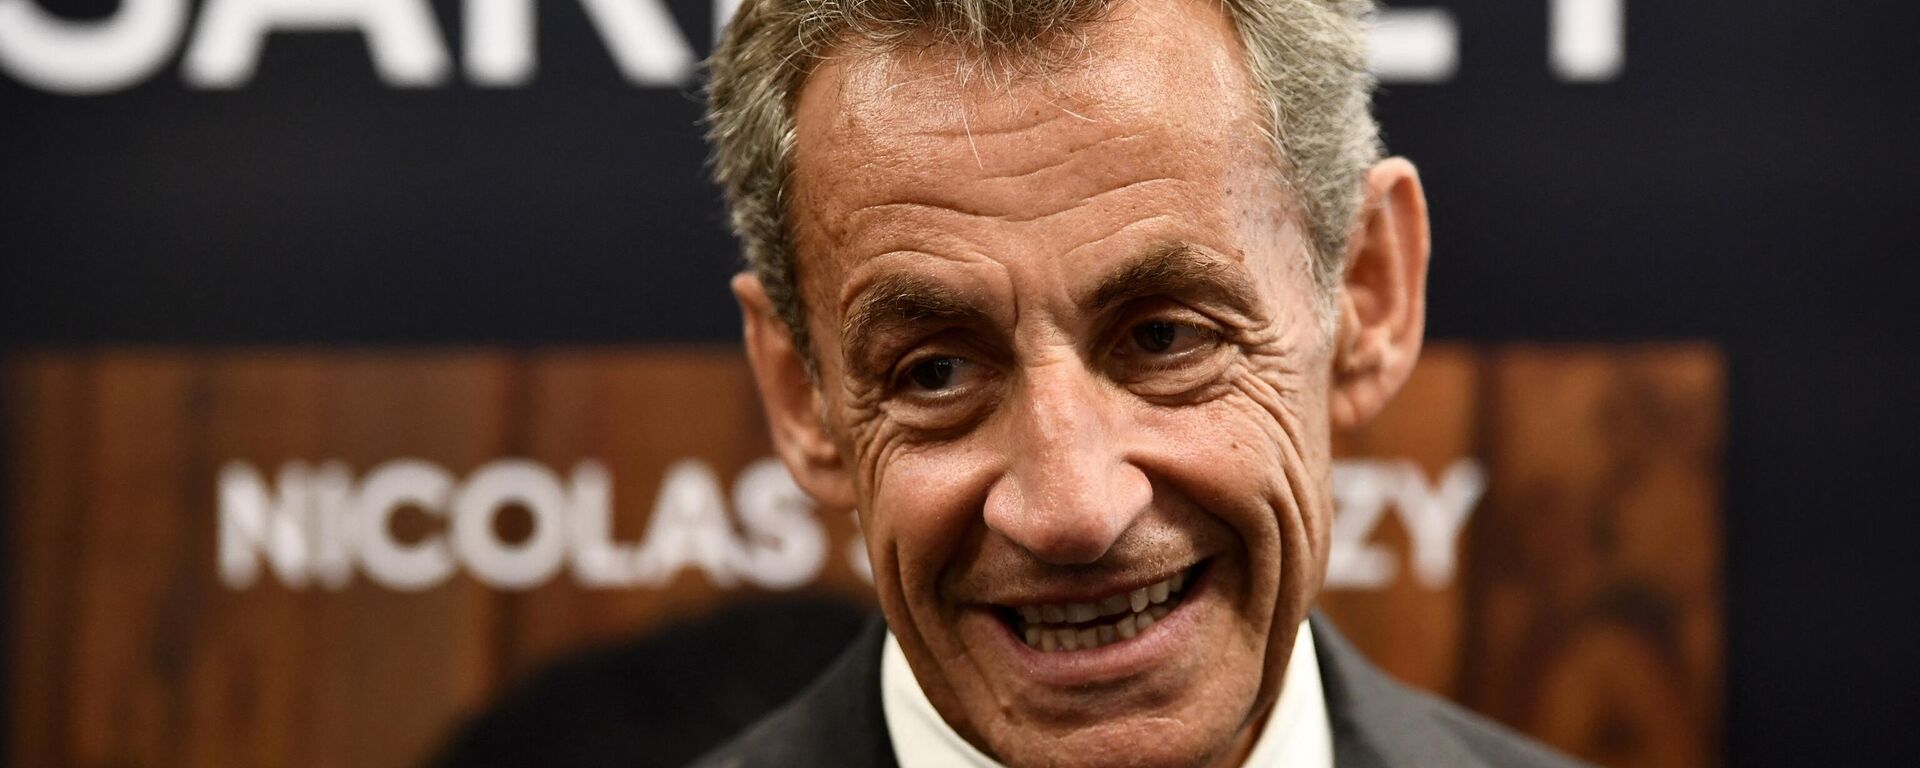 Former French President Nicolas Sarkozy reacts during a book signing session for his last book, in Arcachon, southwestern France, on August 25, 2023. Sarkozy will be tried in 2025 over allegations he took money from late Libyan dictator Moamer Kadhafi to fund one of his election campaigns, prosecutors said on August 25, 2023. - Sputnik International, 1920, 13.09.2023